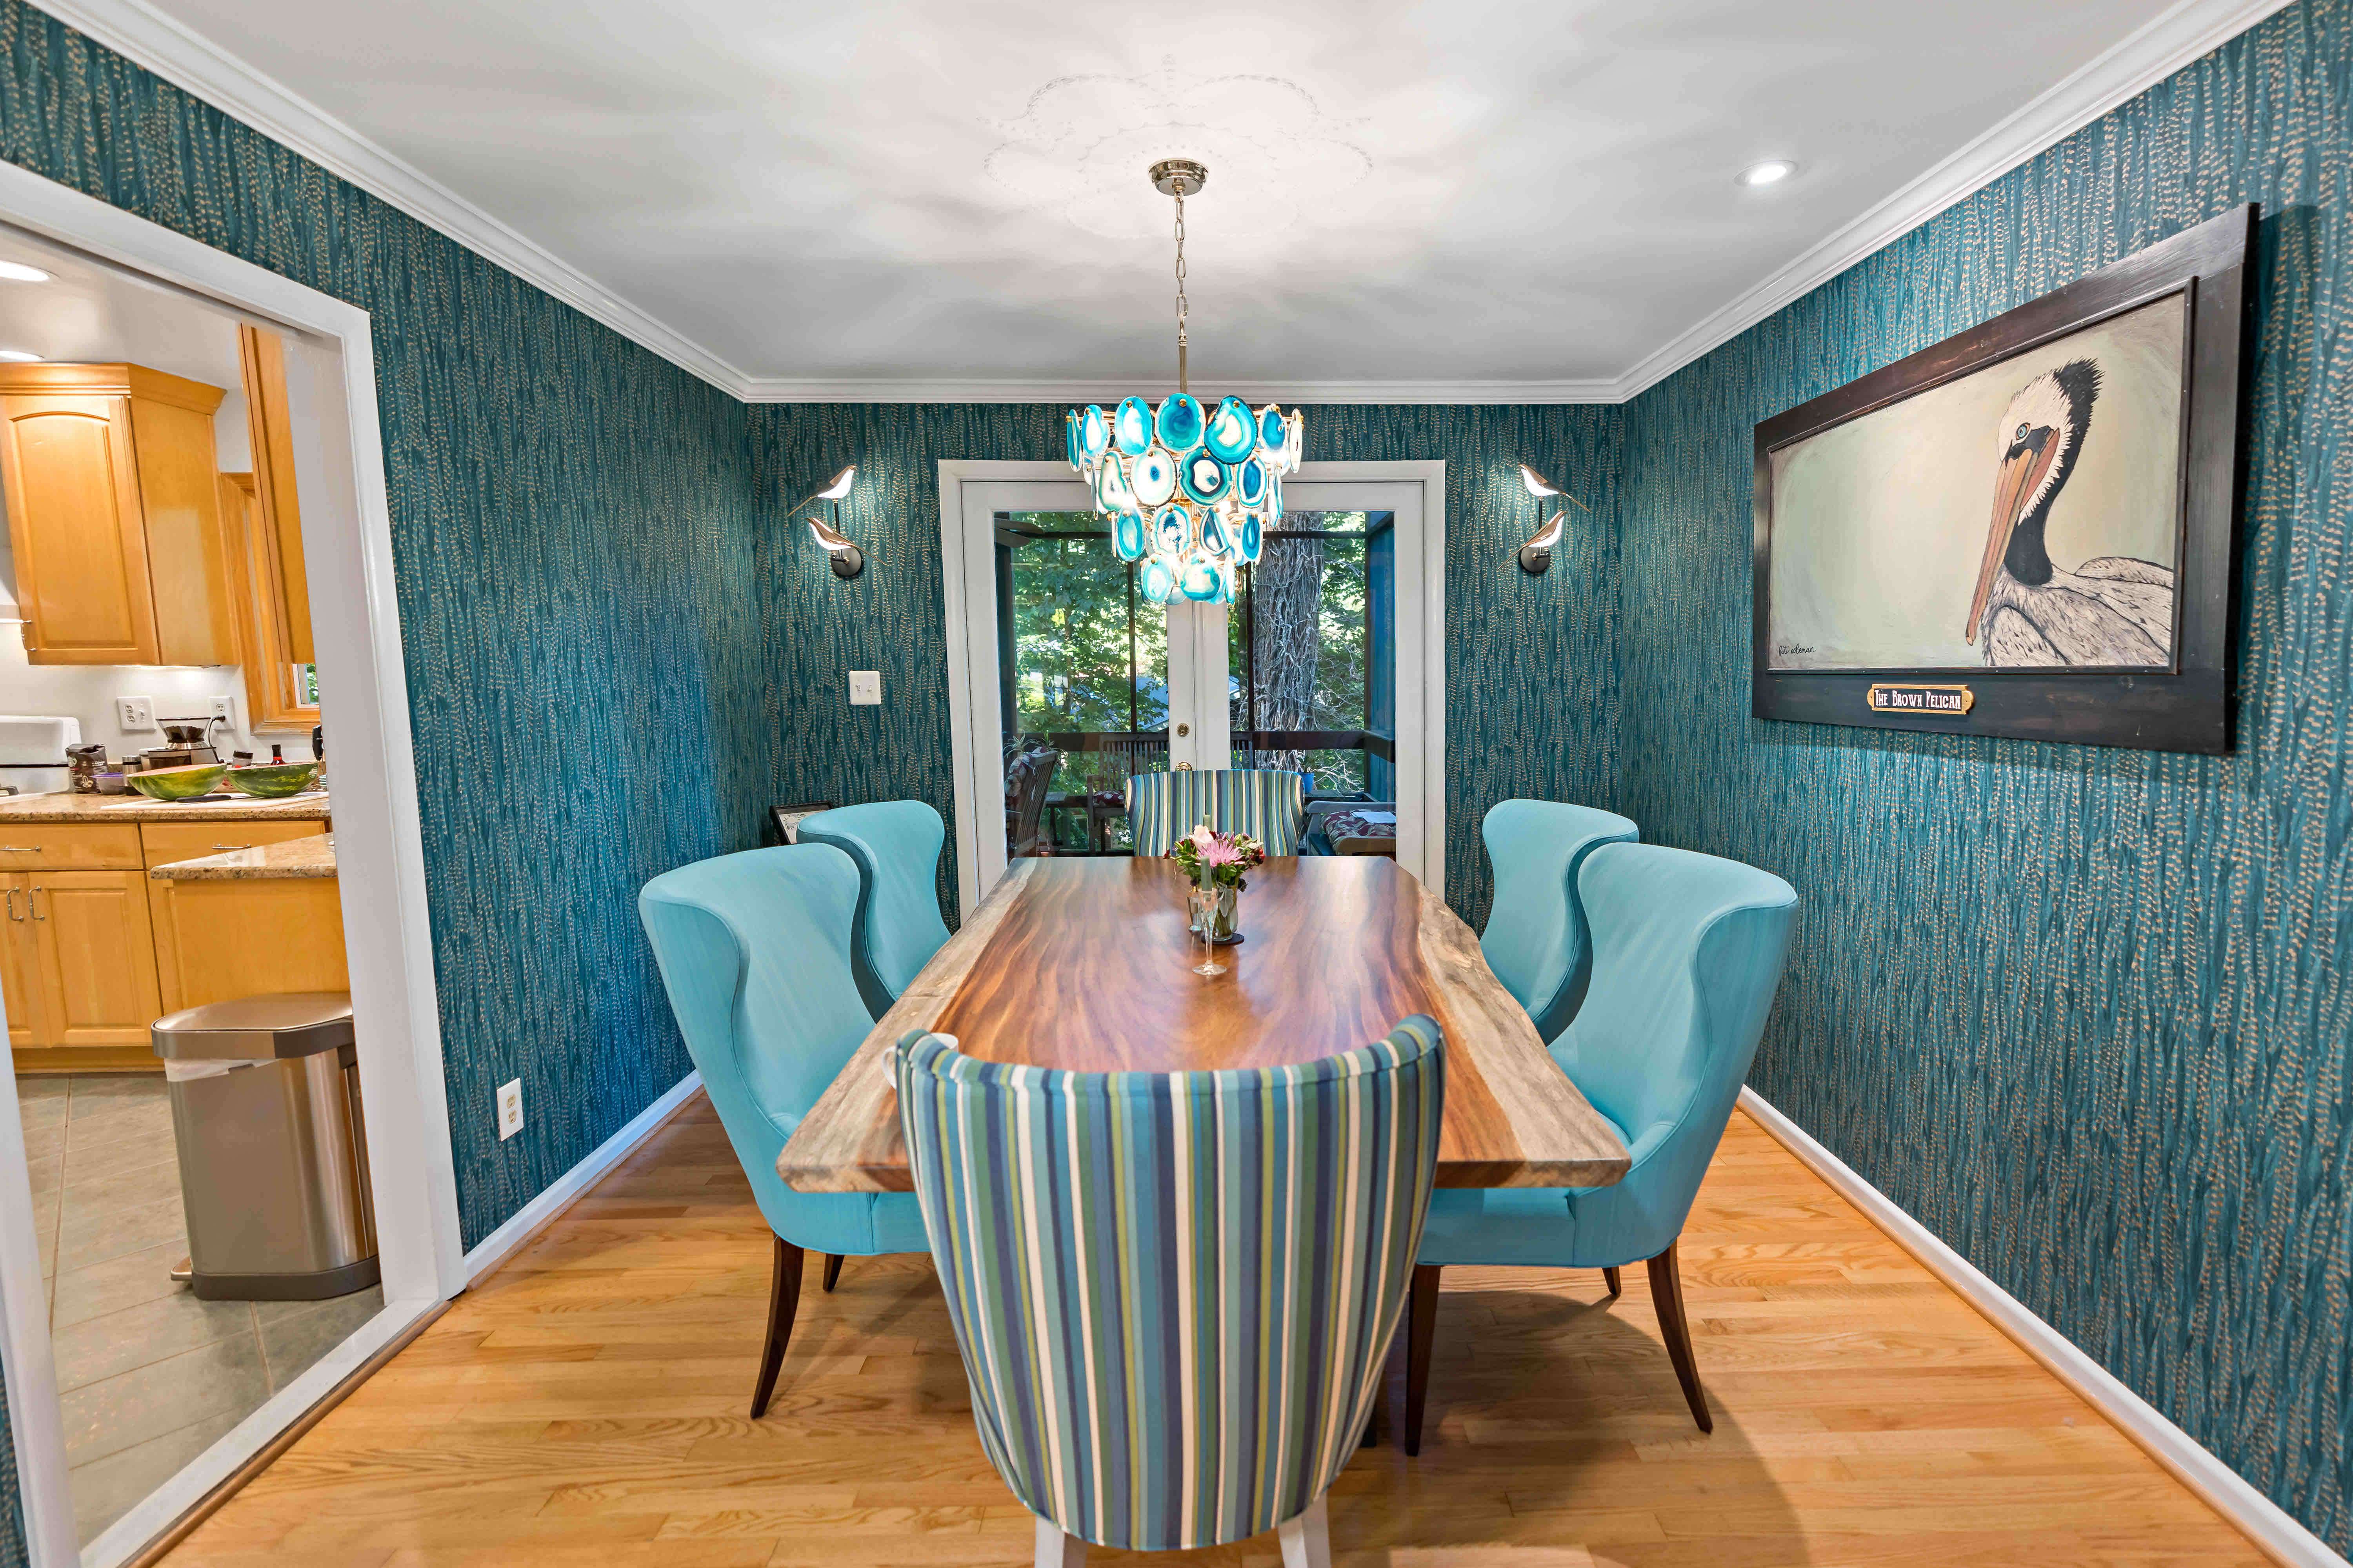 Brightly Colorful and Contemporary: Falls Church Remodel Is a Feast for the Eyes